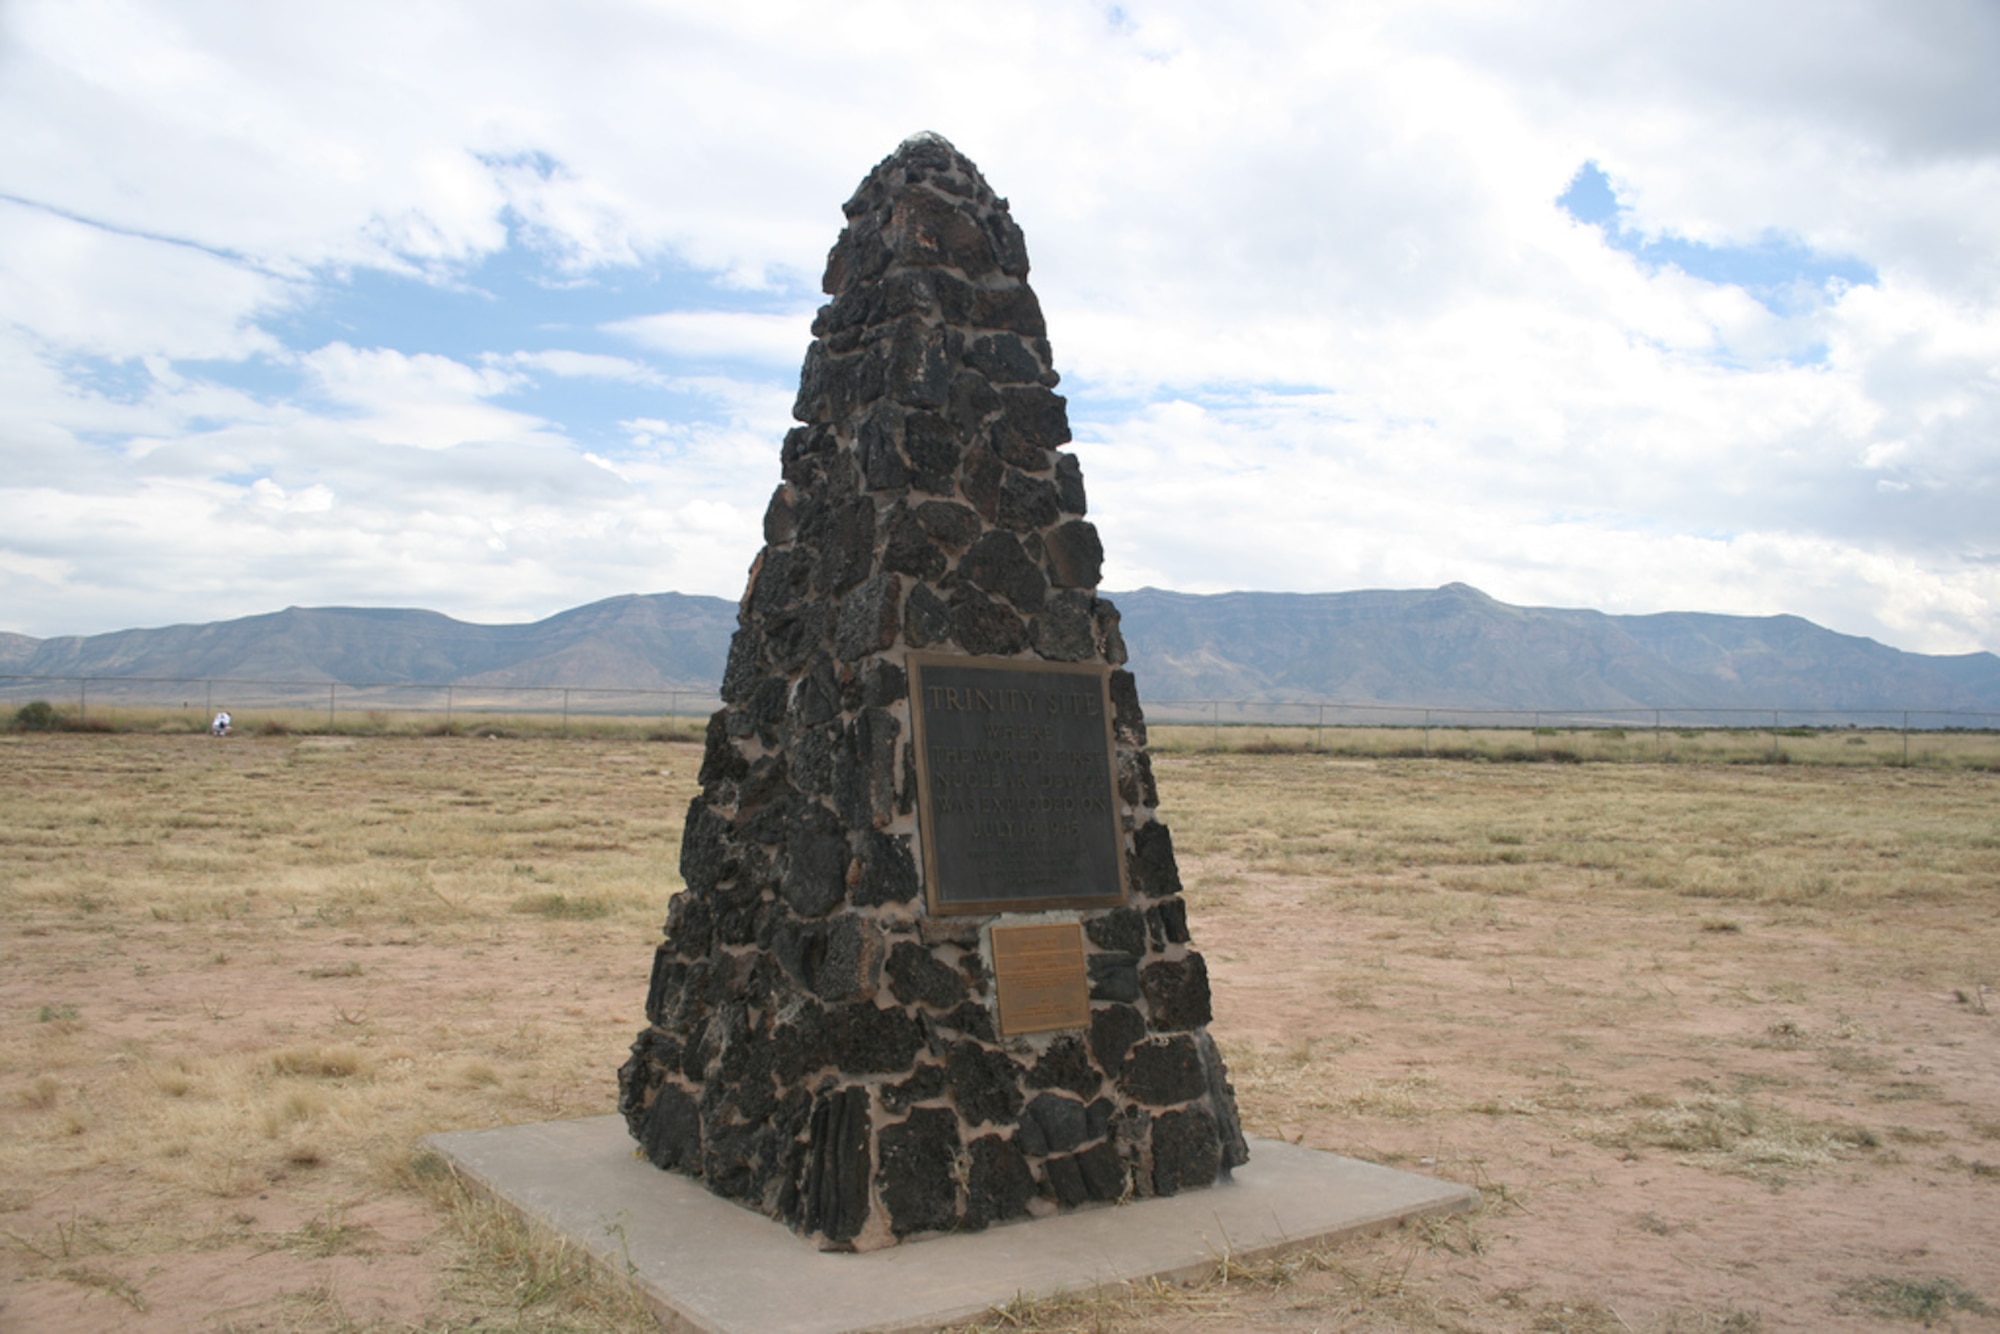 WHITE SANDS MISSILE RANGE, N.M. -- A lava-rock obelisk lies at ground zero at the Trinity Site. The Trinity Site is where the first nuclear device was tested July 16, 1945. (Courtesy photo)